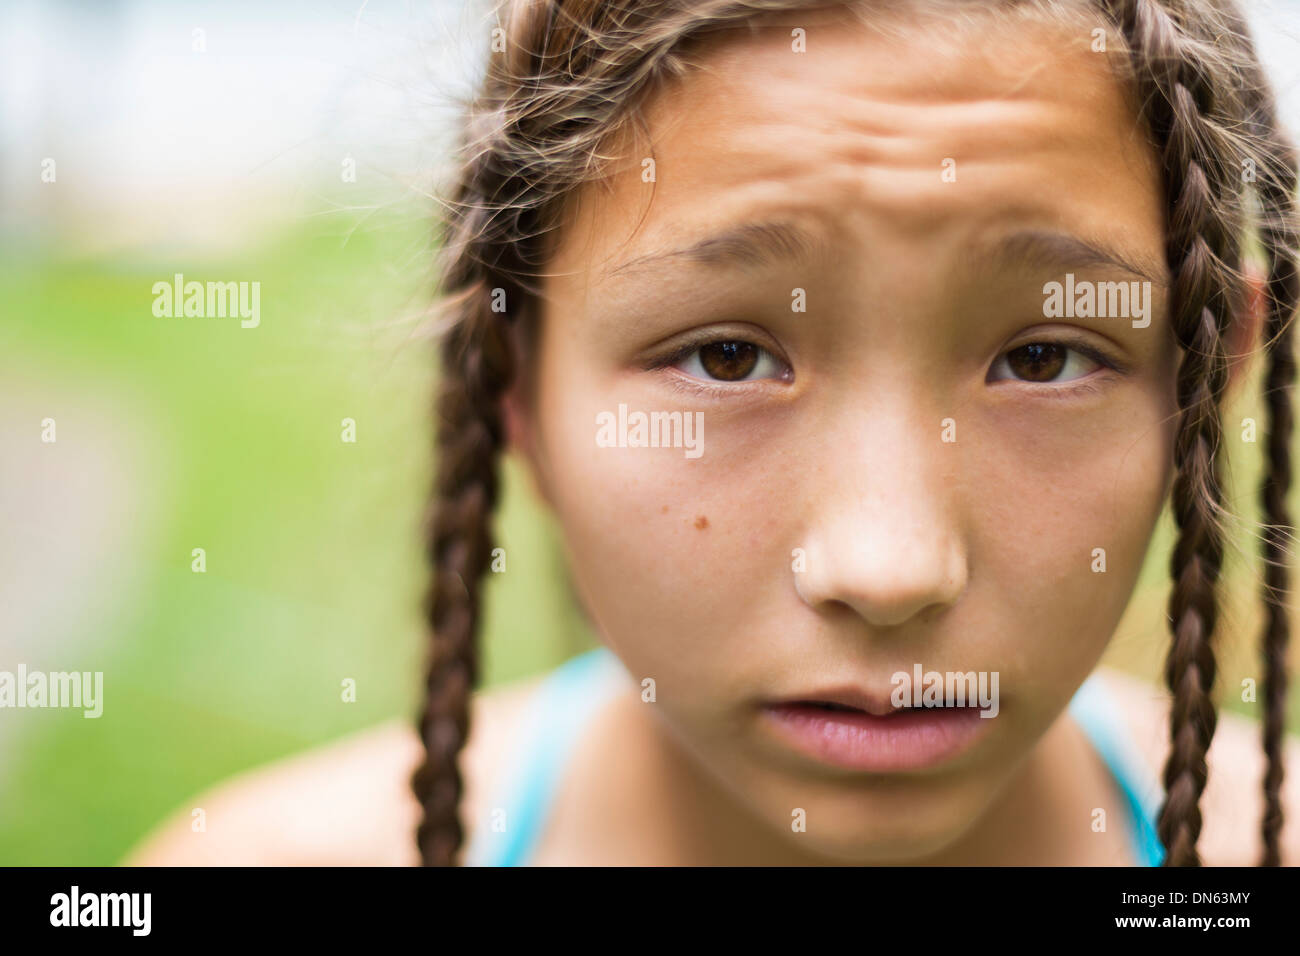 Mixed race girl with braids Stock Photo